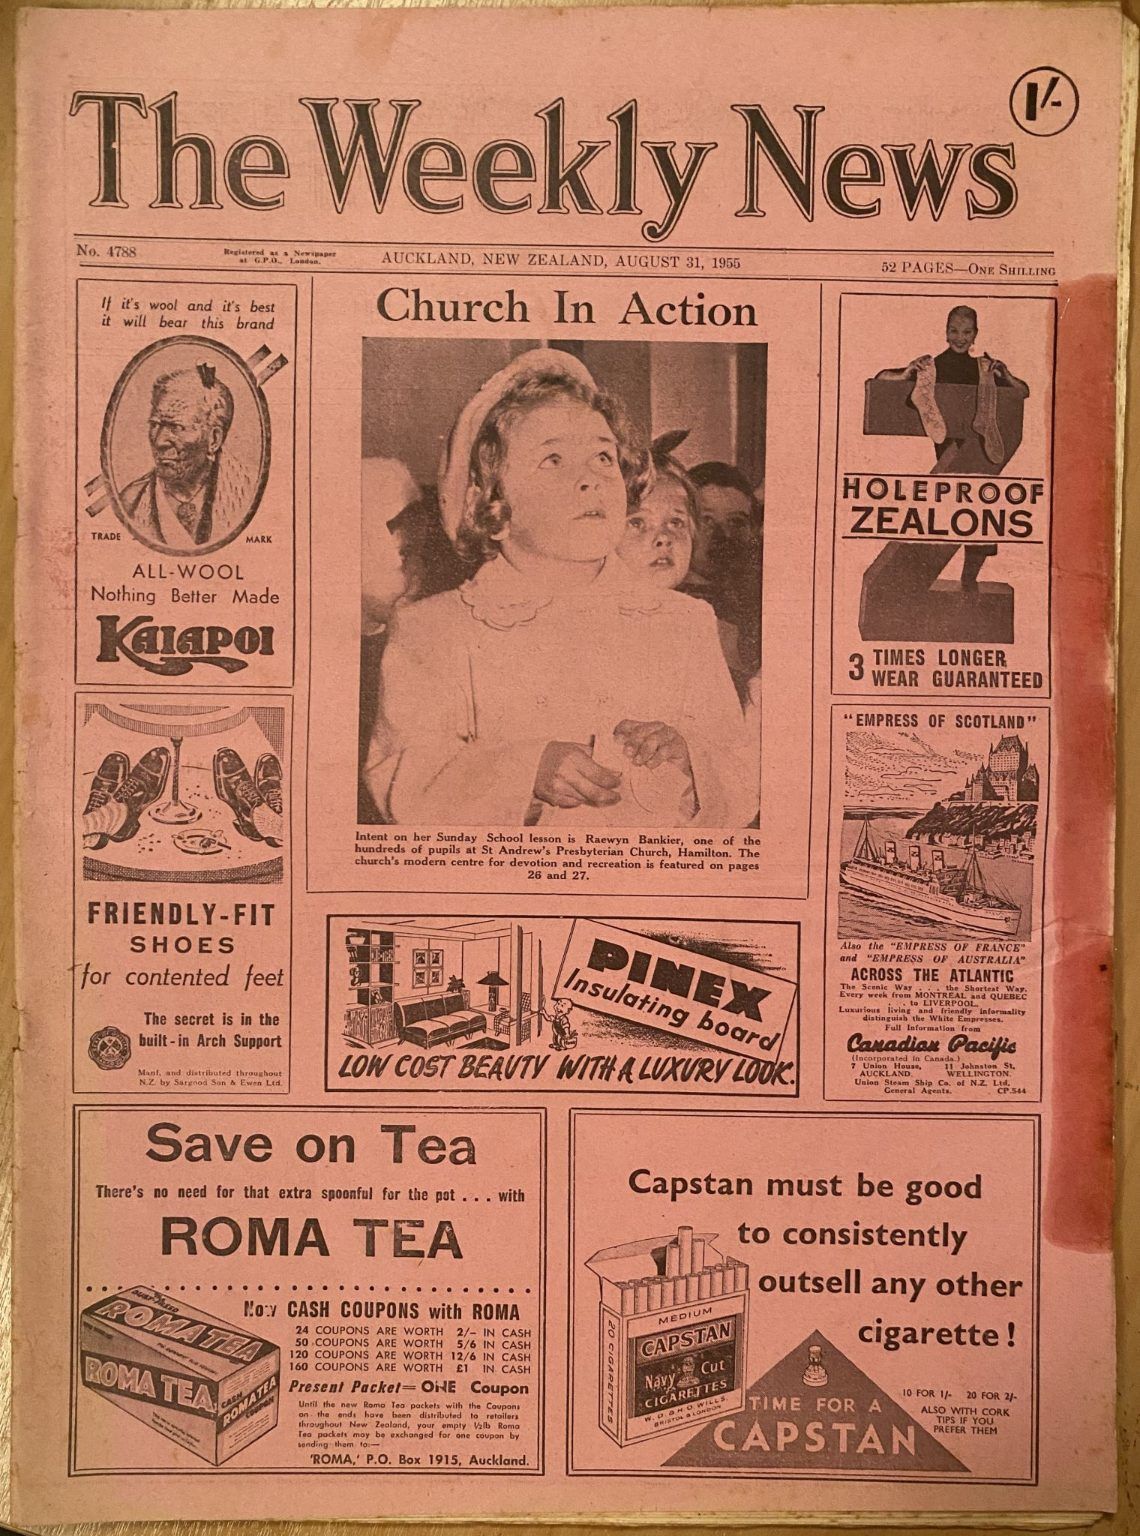 OLD NEWSPAPER: The Weekly News - No. 4788, 31 August 1955